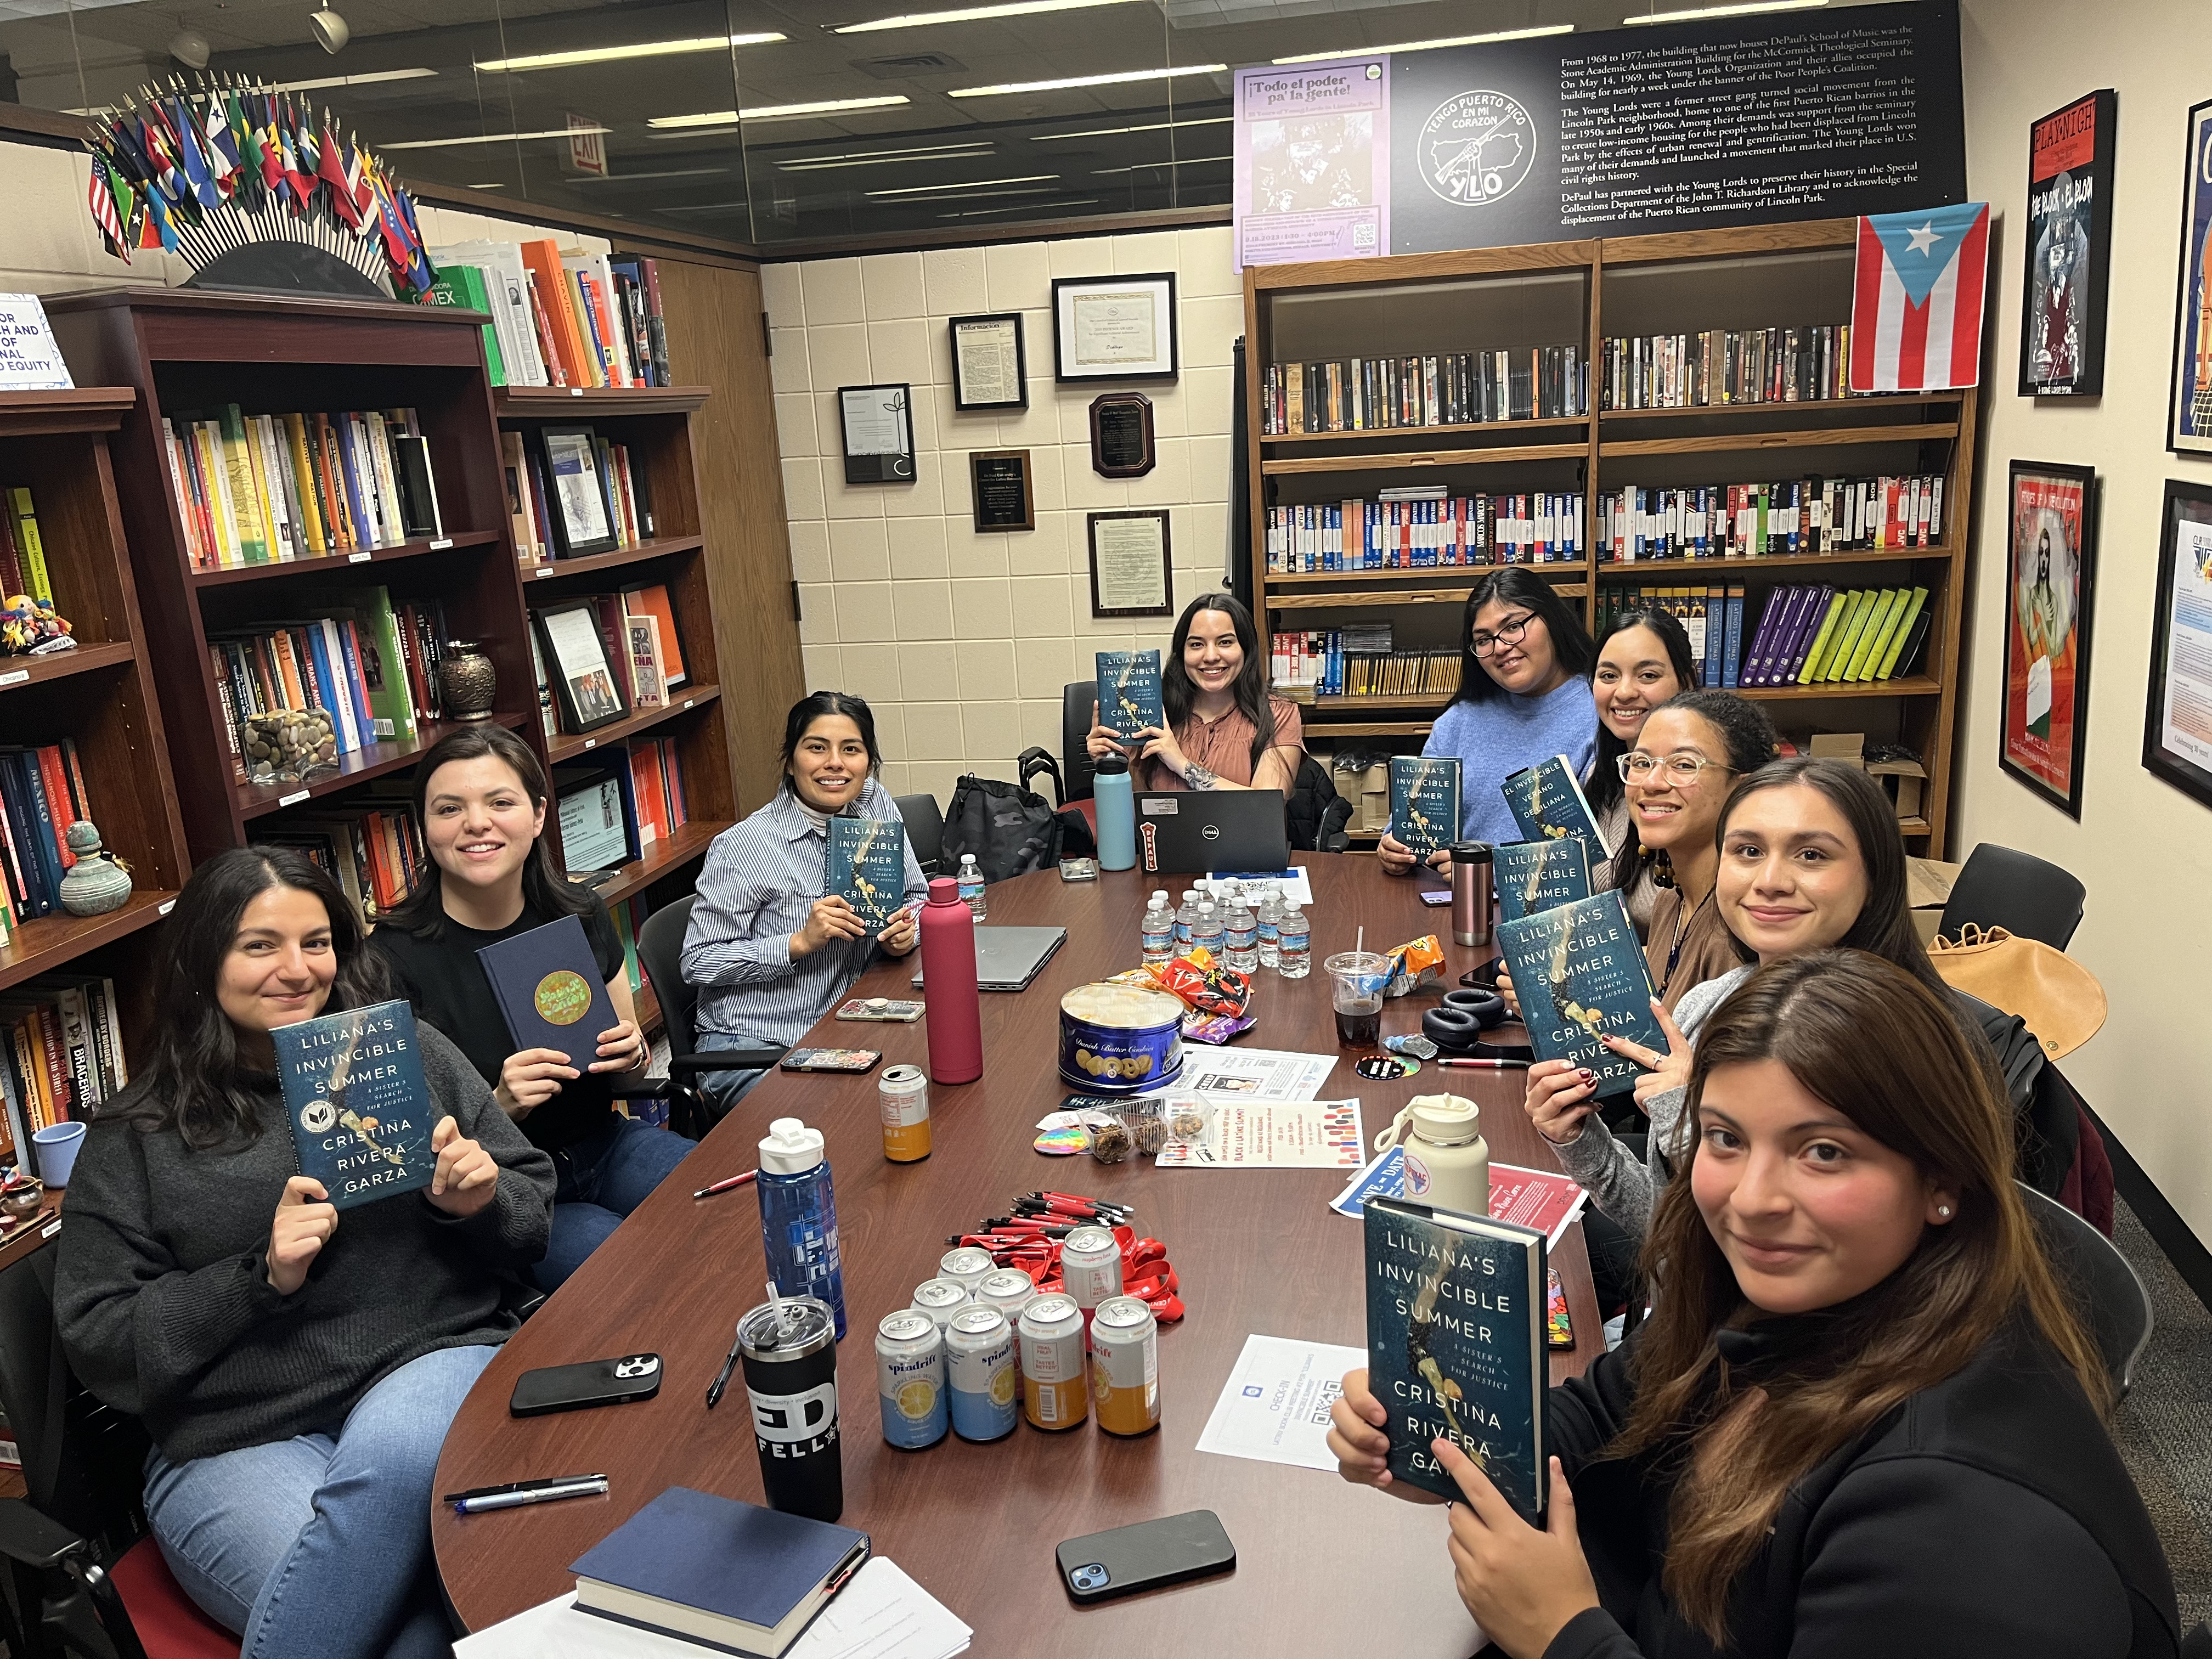 The Latinx Book club members holding up their books, Liliana's Invincible Summer, in DePaul's Center for Latino Research